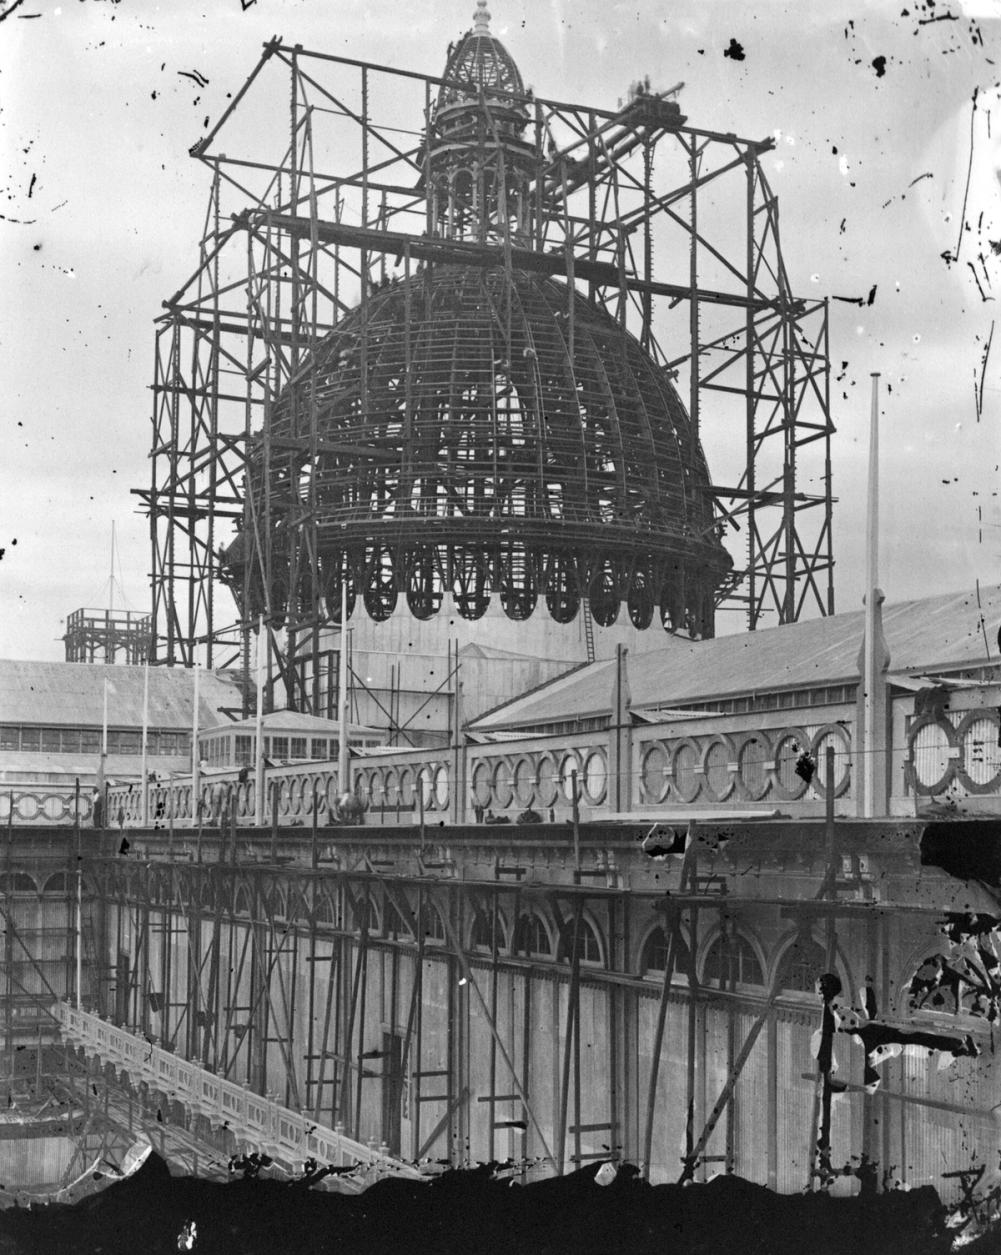 Black and white image of the a wooden dome structure being constructed